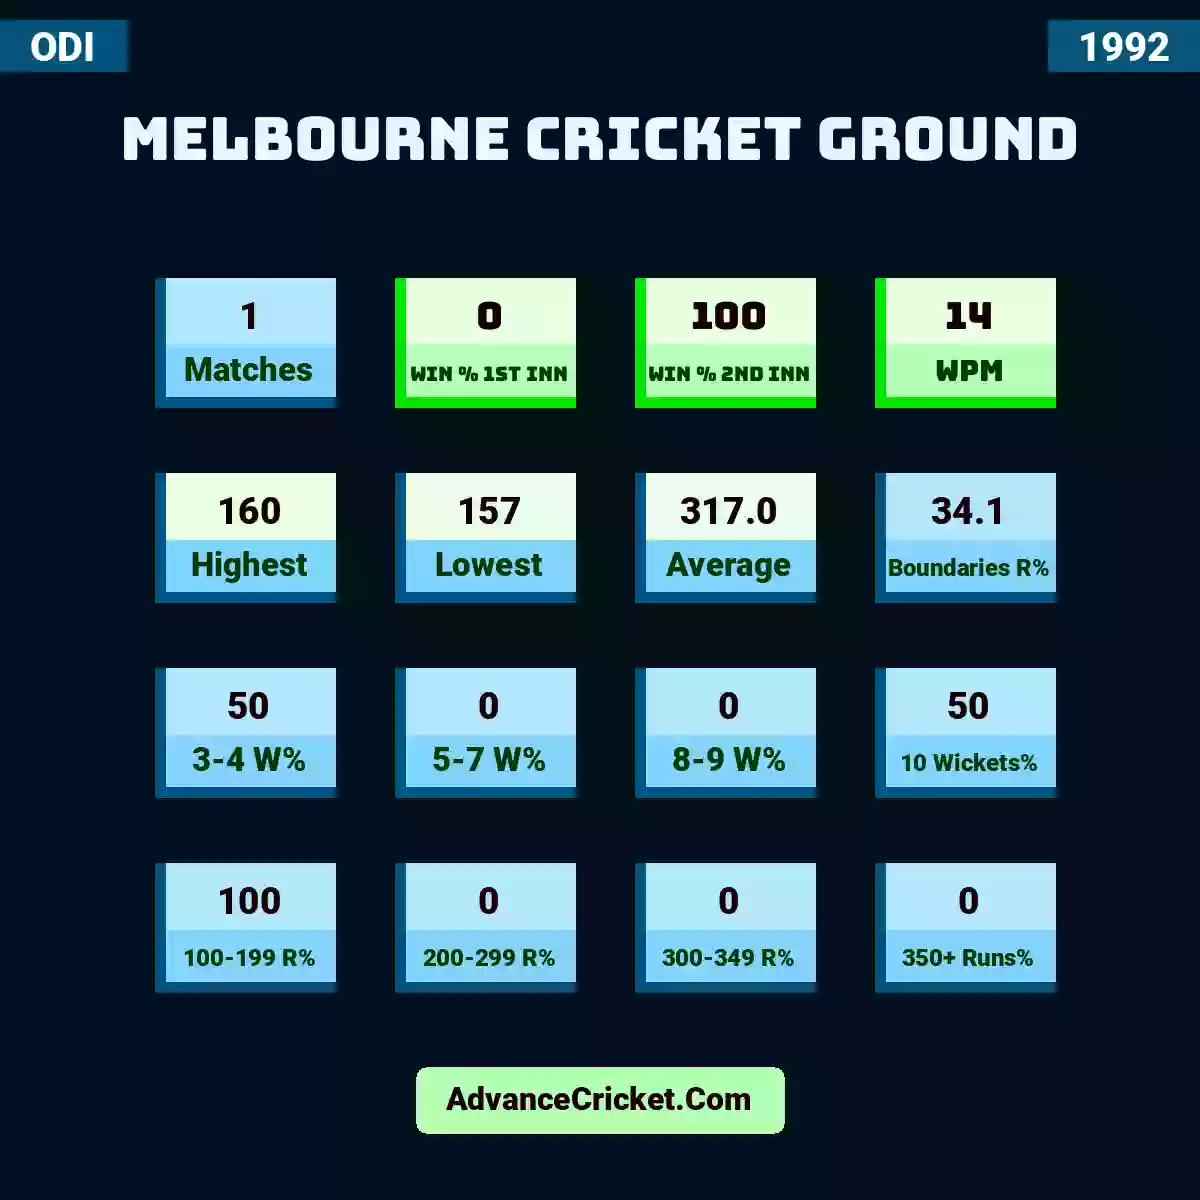 Image showing Melbourne Cricket Ground with Matches: 1, Win % 1st Inn: 0, Win % 2nd Inn: 100, WPM: 14, Highest: 160, Lowest: 157, Average: 317.0, Boundaries R%: 34.1, 3-4 W%: 50, 5-7 W%: 0, 8-9 W%: 0, 10 Wickets%: 50, 100-199 R%: 100, 200-299 R%: 0, 300-349 R%: 0, 350+ Runs%: 0.